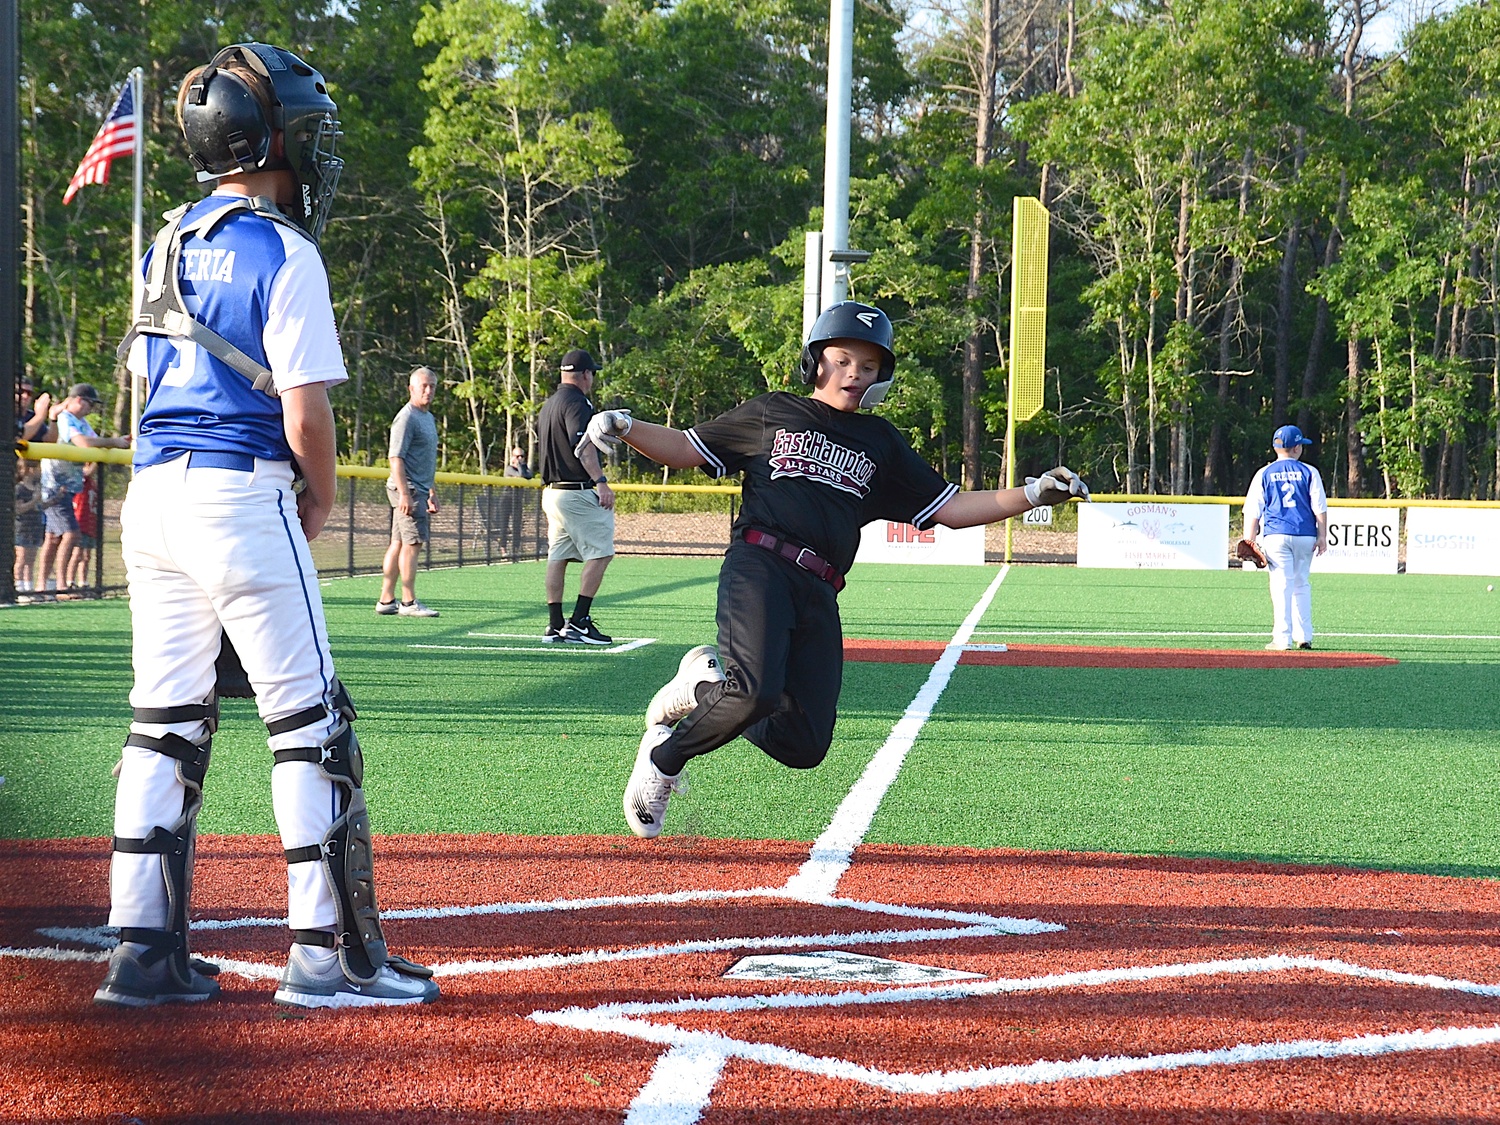 Griffin Page slides at home plate without a throw after the ball was thrown into the outfield.  KYRIL BROMLEY